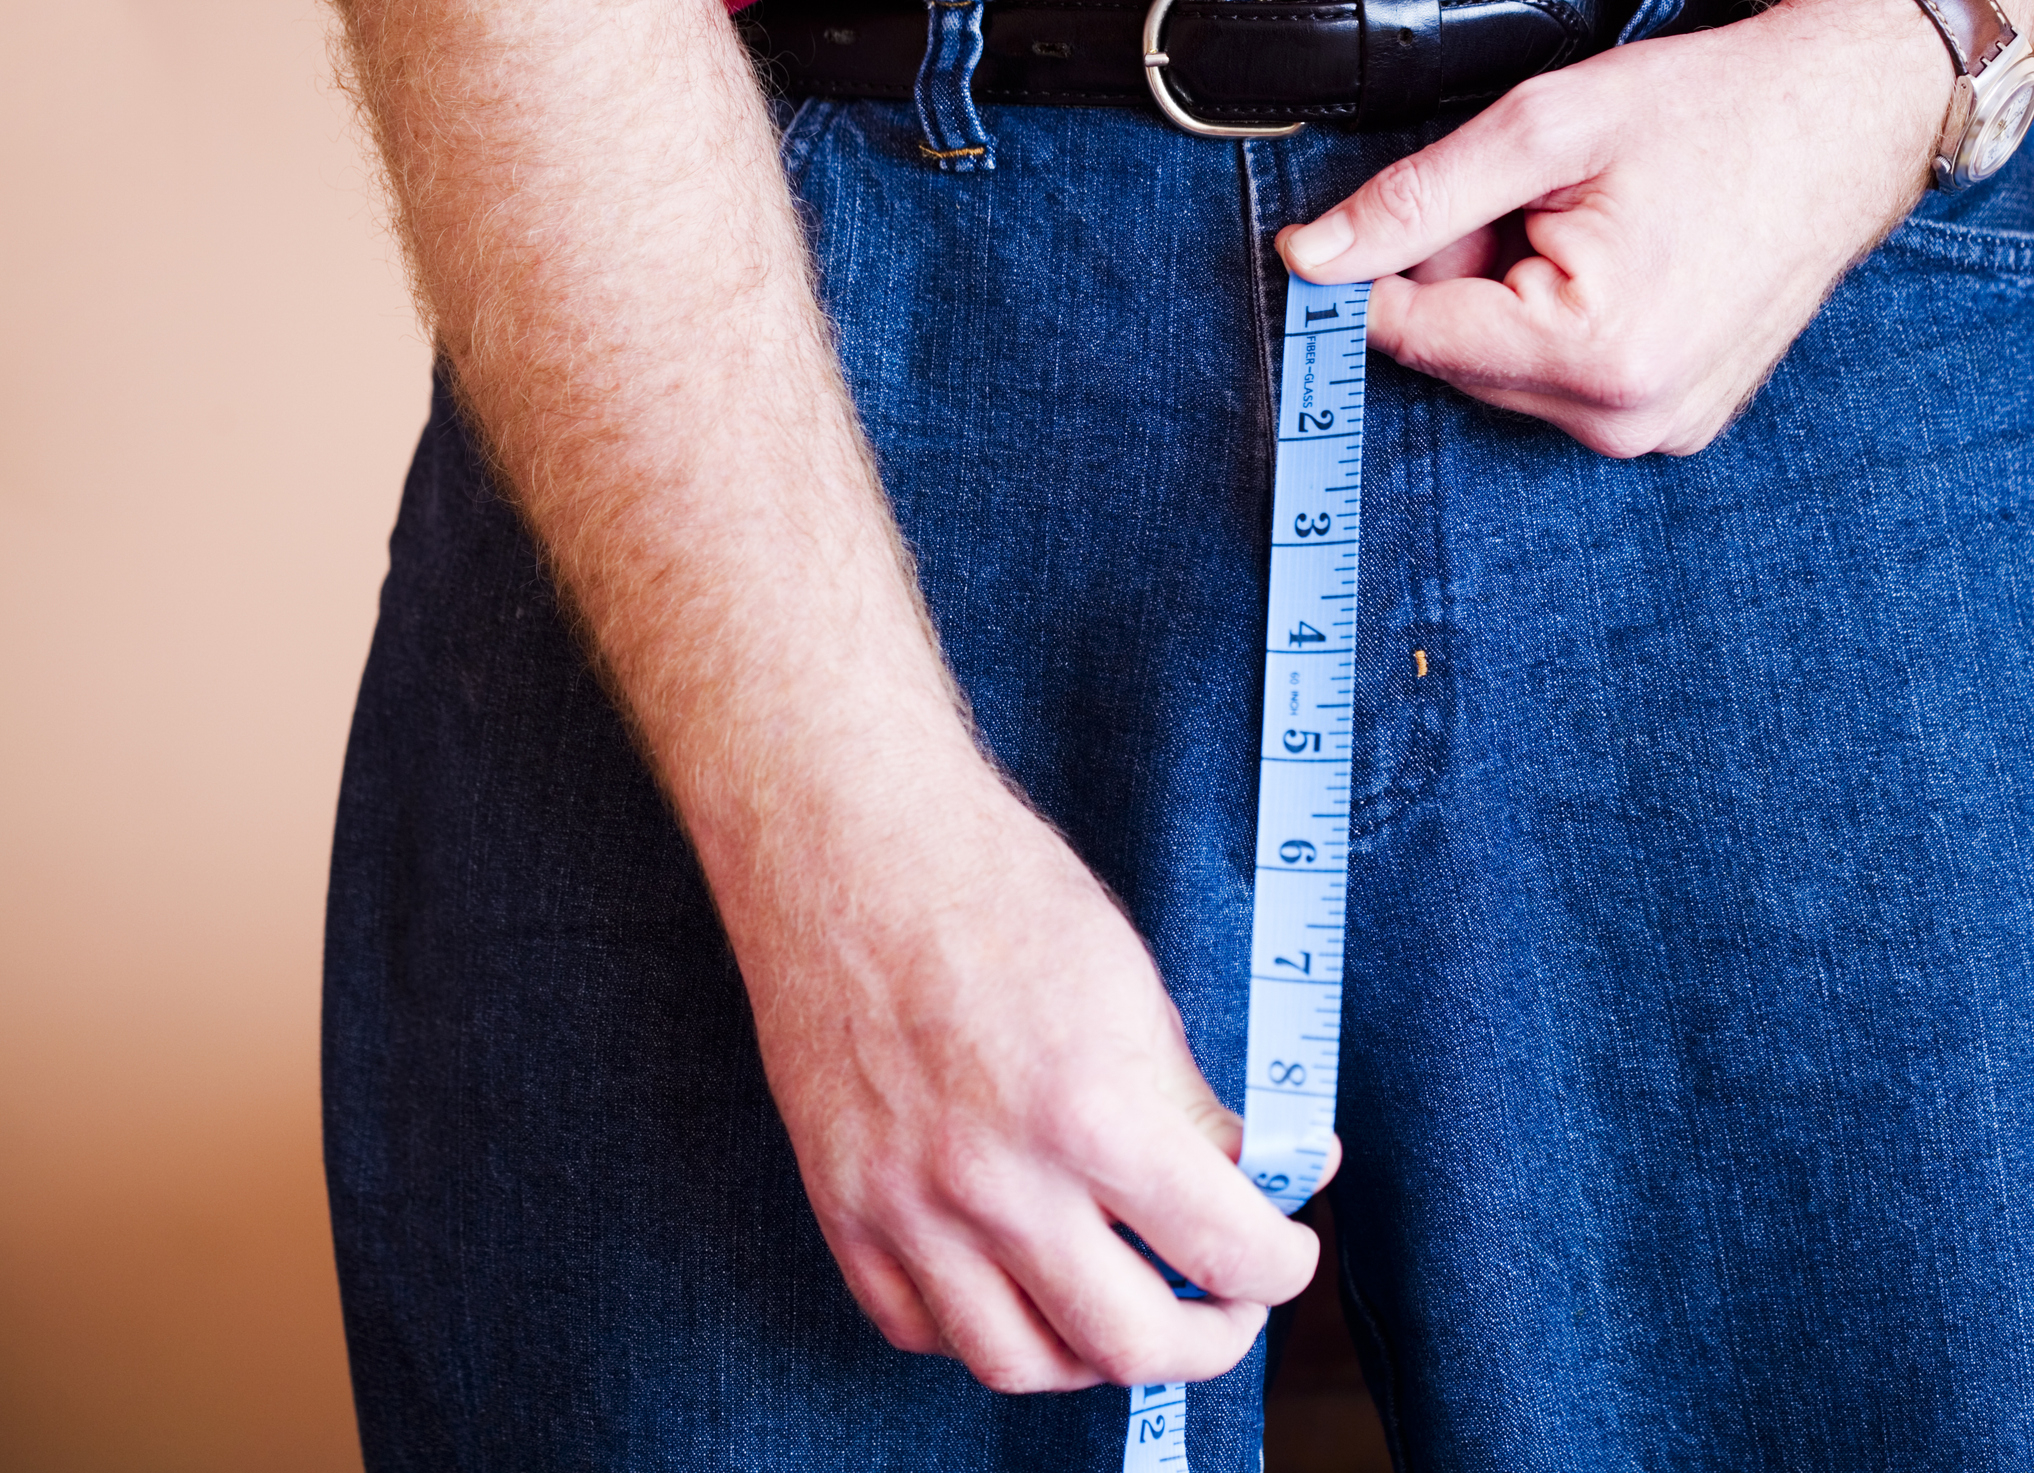 Close-up of a person measuring waistline with a tape measure over jeans